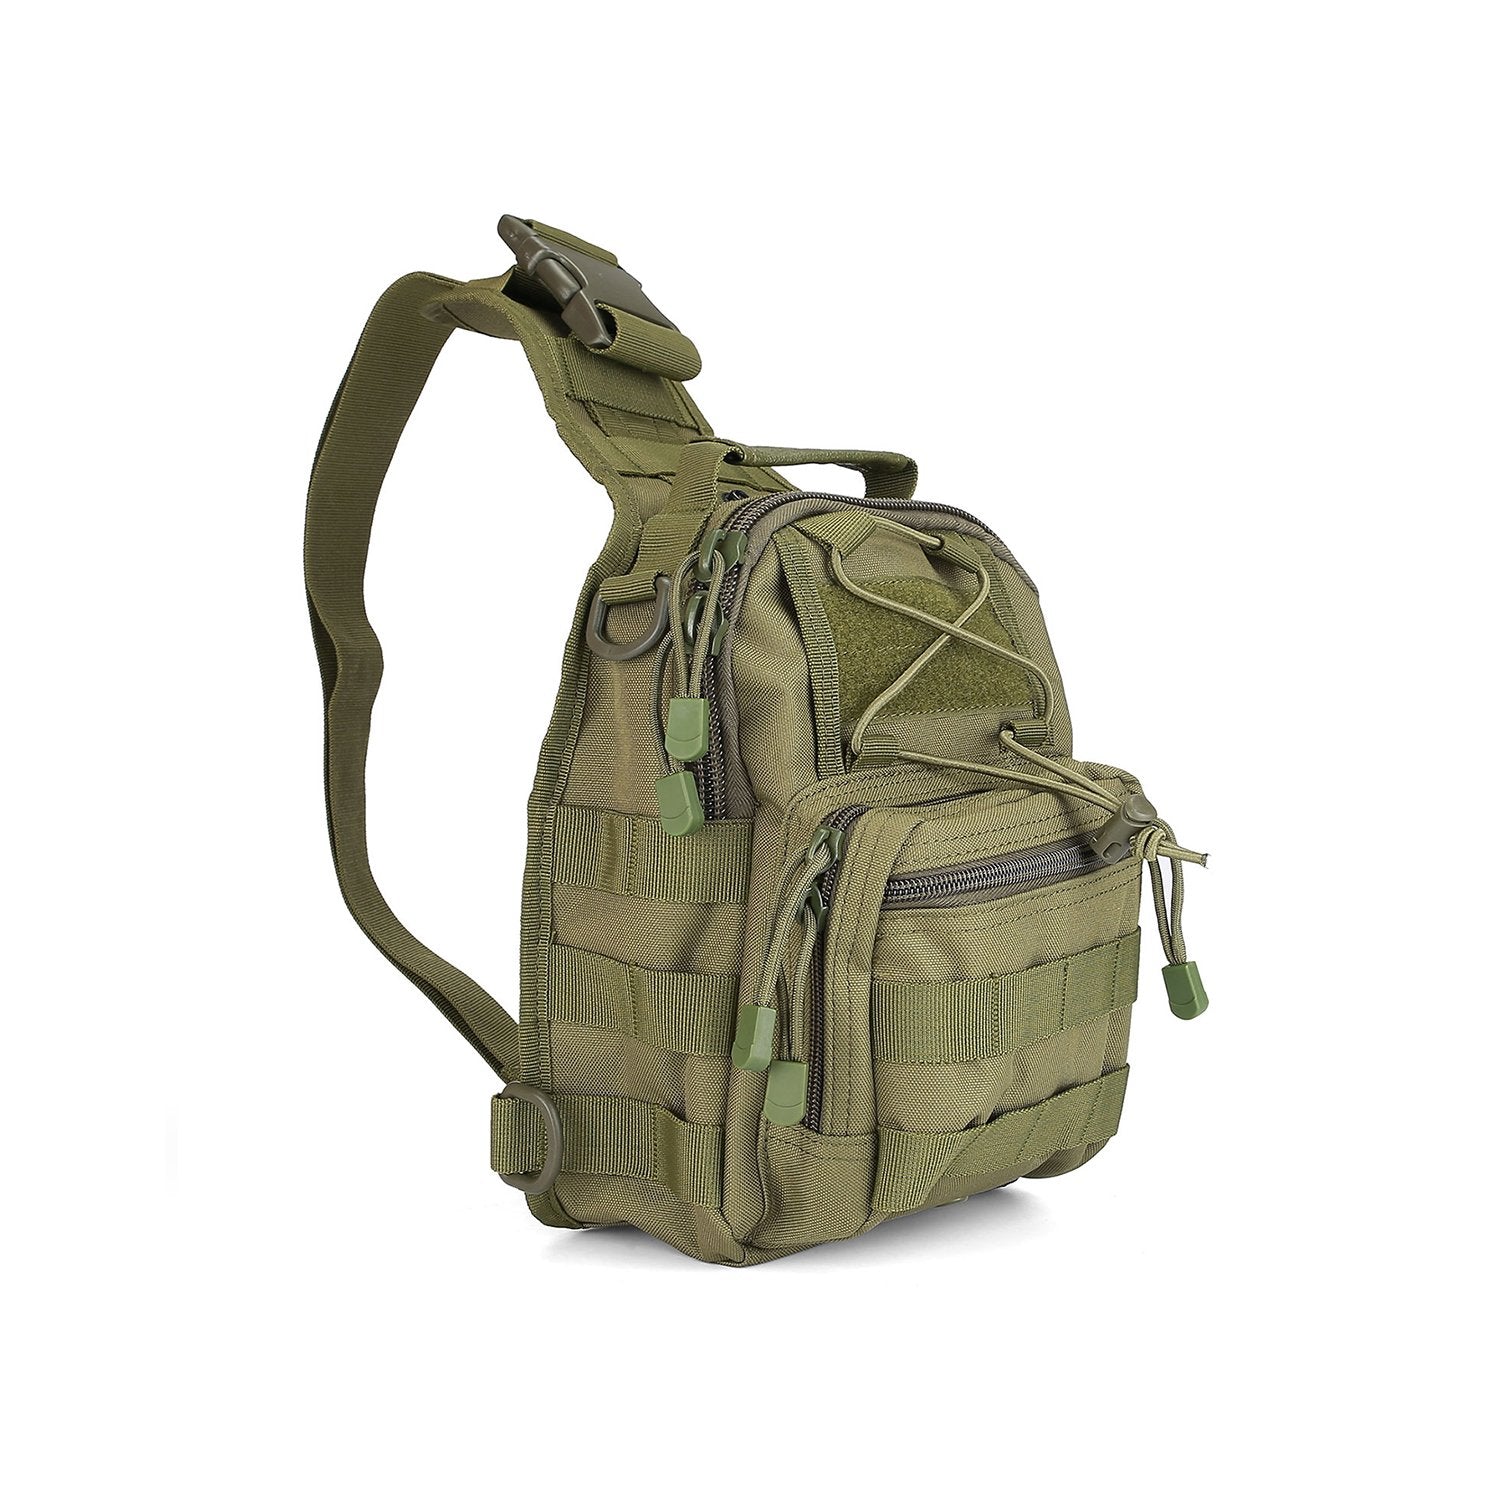 Tactical Sling Bag Pack with Pistol Holster | ProCase green